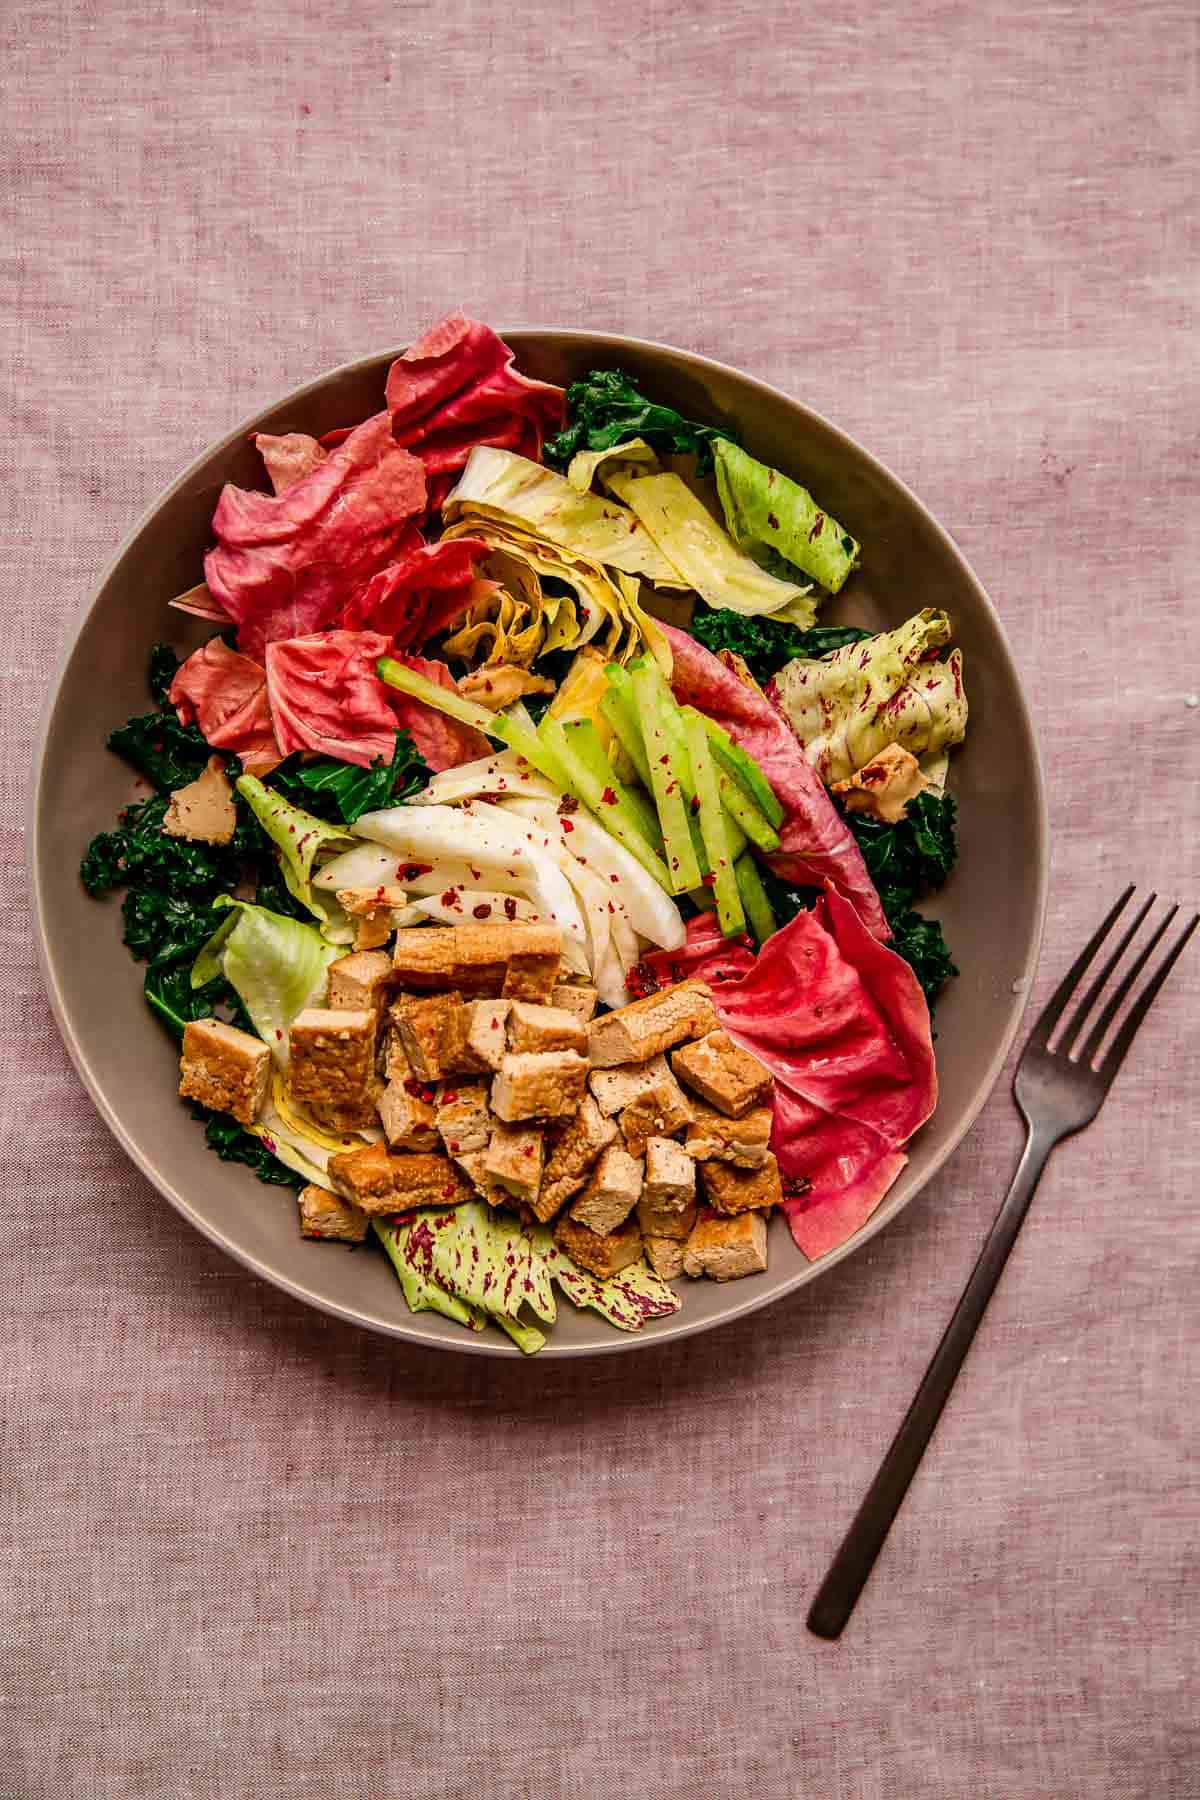 A big beautiful bowl of colorful salad, with pink and green veggies and steamed tofu - all on a faded pink linen.